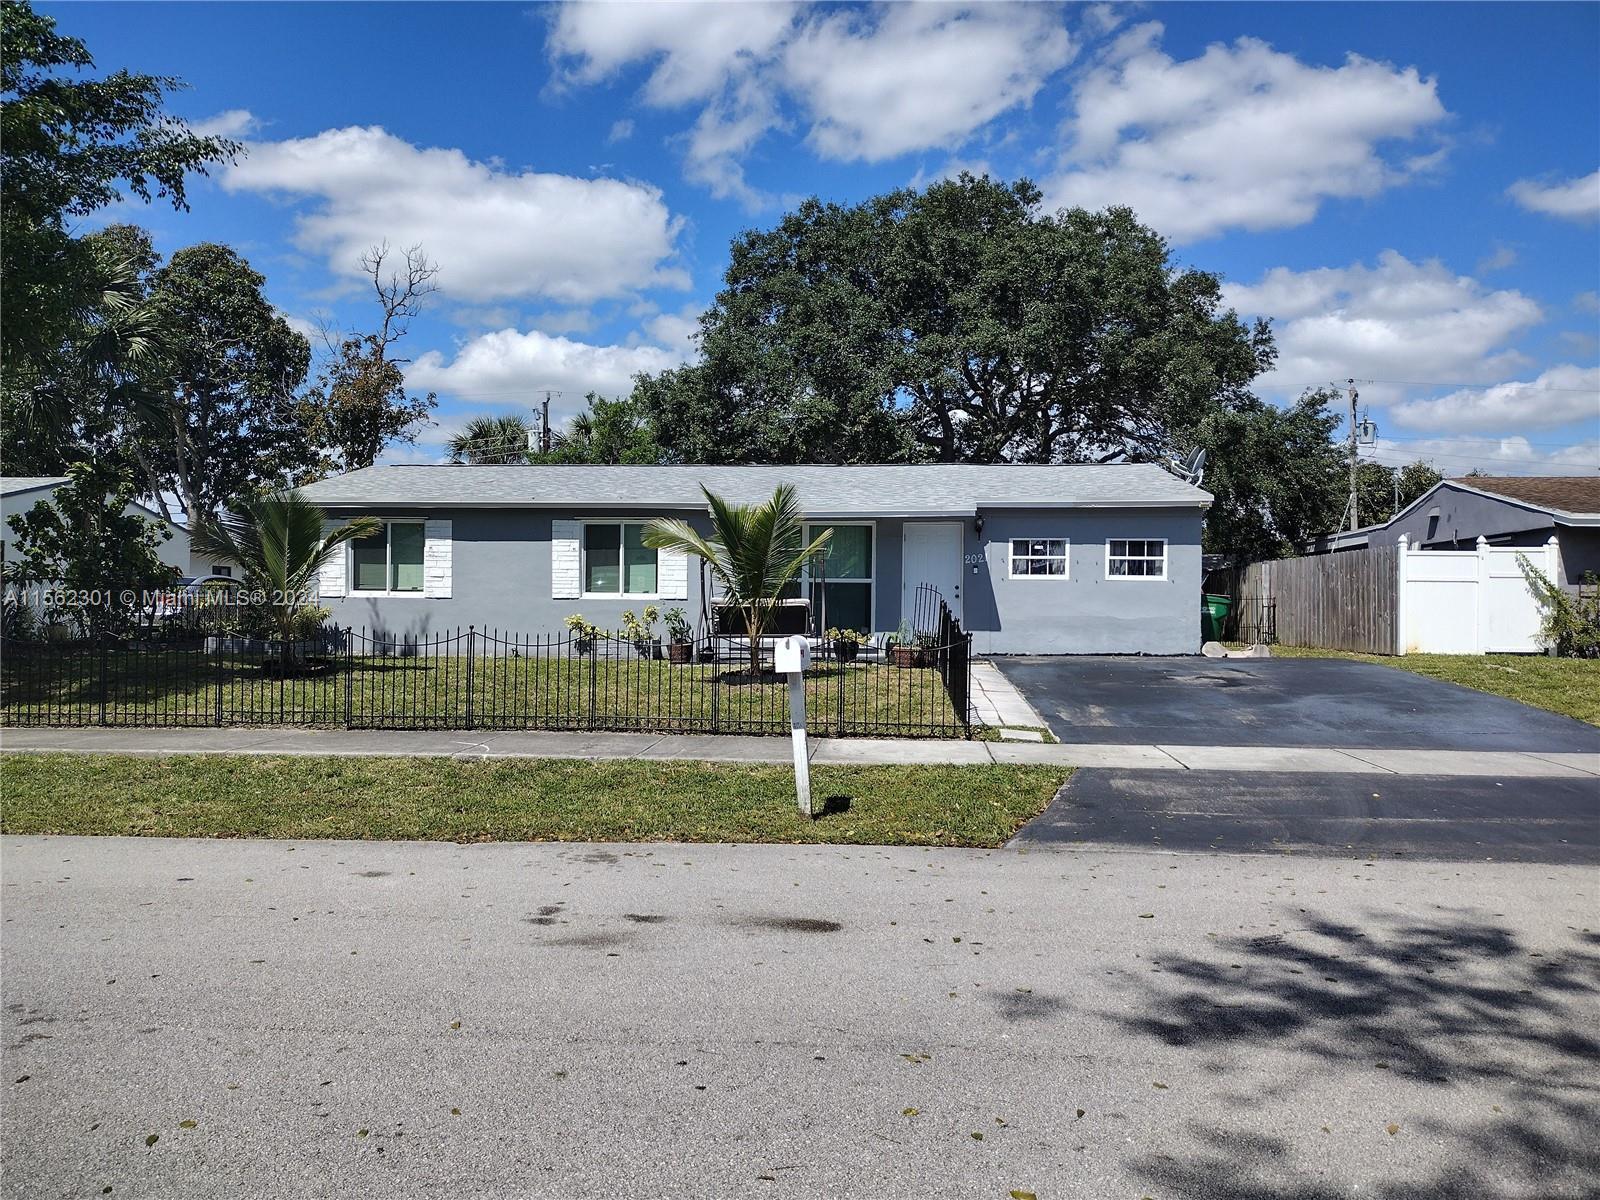 Photo of 2021 SW 47th Ave in Fort Lauderdale, FL